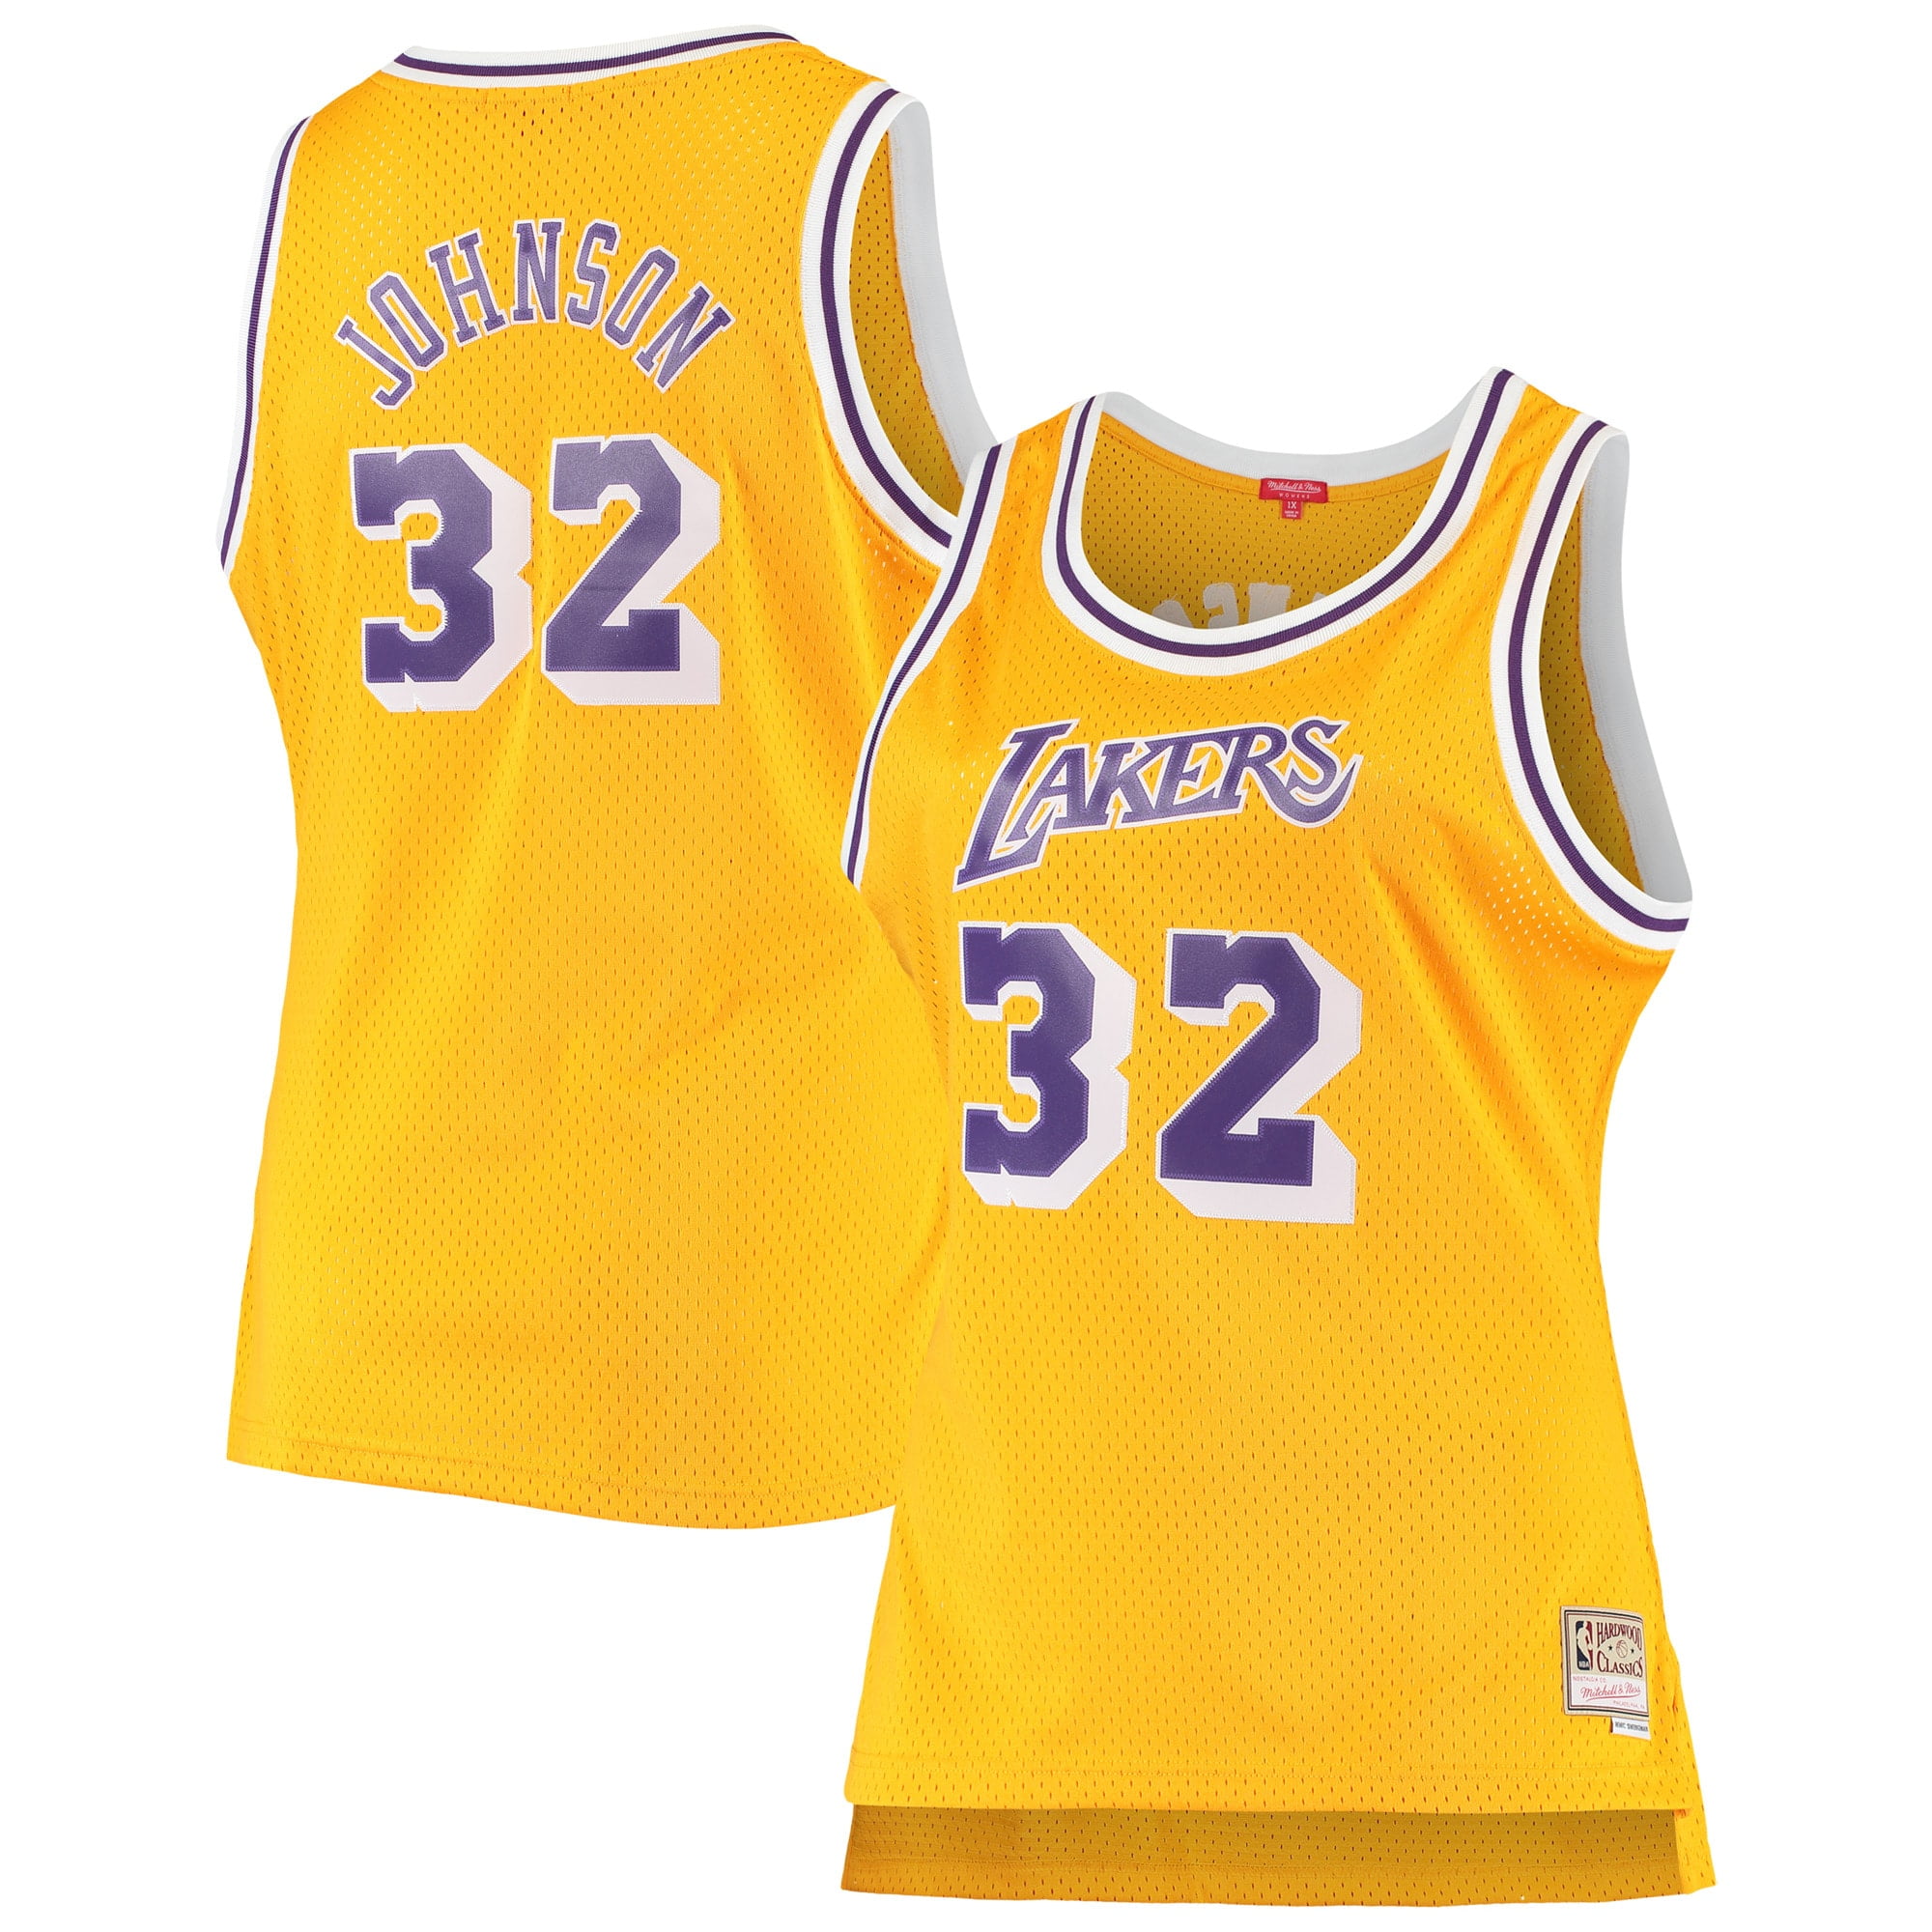 4x lakers jersey